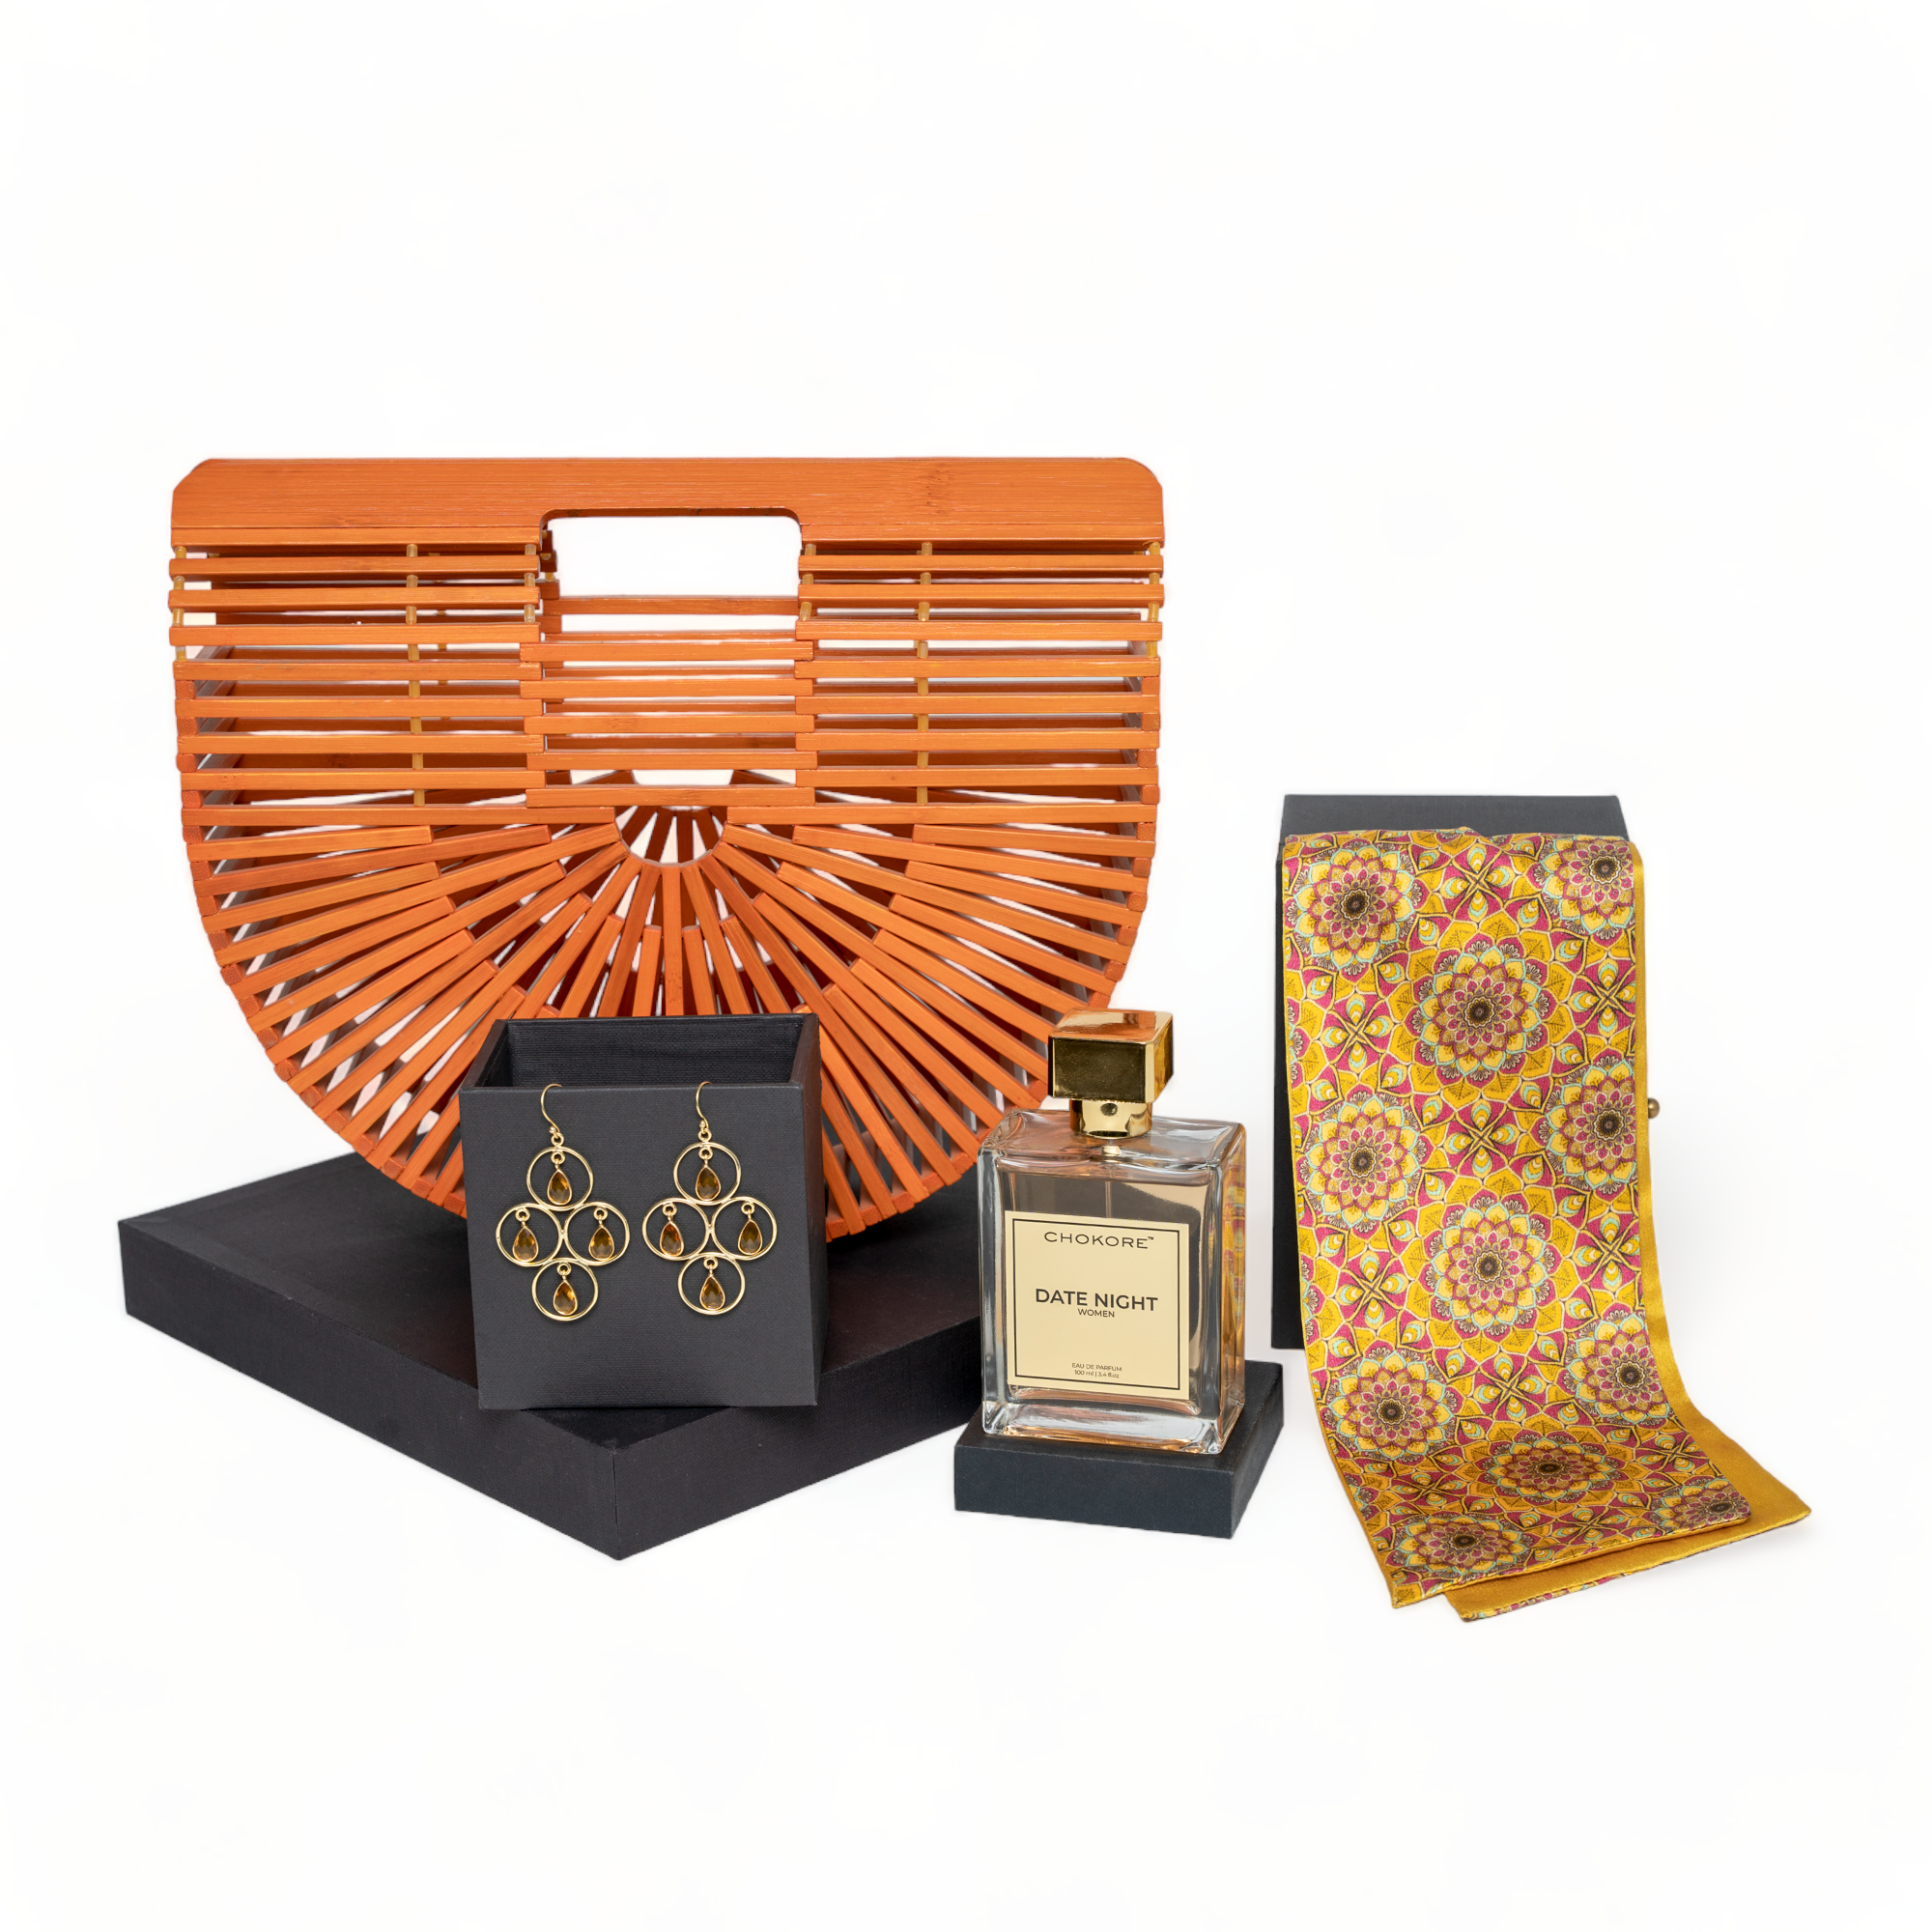 Chokore Special 4-in-1 Gift Set for Her (Bamboo Bag, 100 ml Date Night Perfume, Earrings, & Silk Scarf)